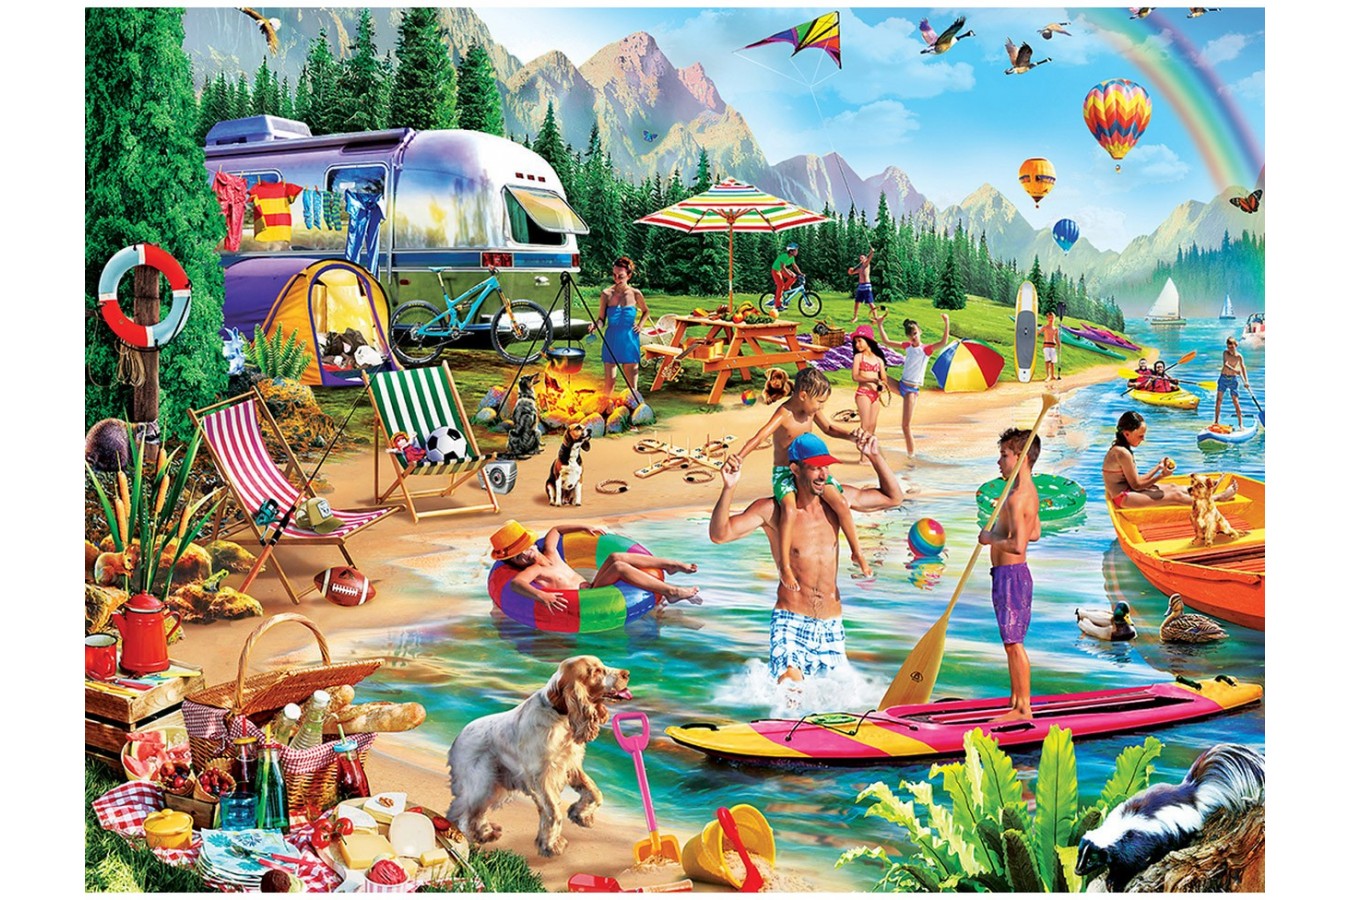 Puzzle Master Pieces - Day at the Lake, 300 piese XXL (Master-Pieces-31999)